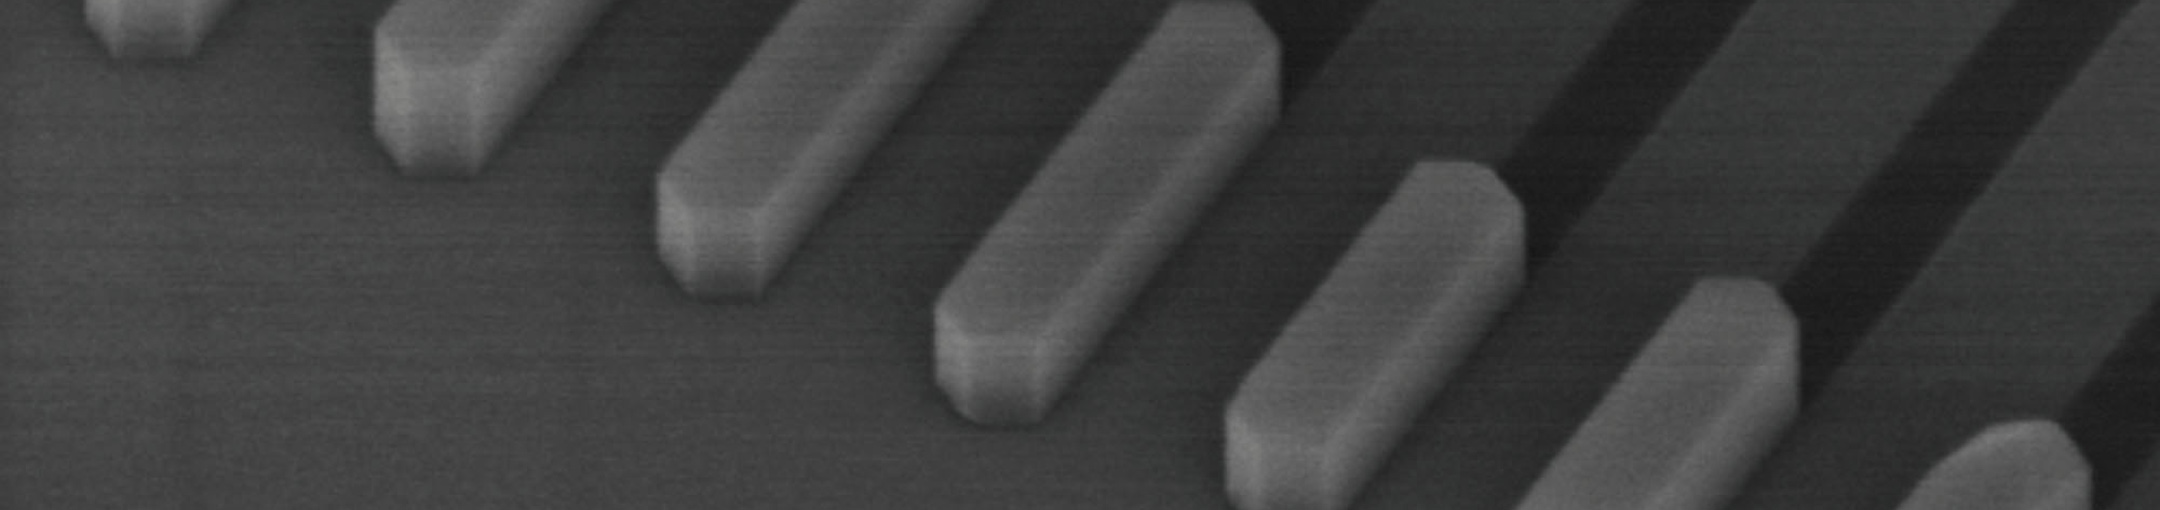 black and white image of uniform rectangular raised objects from a flat surface